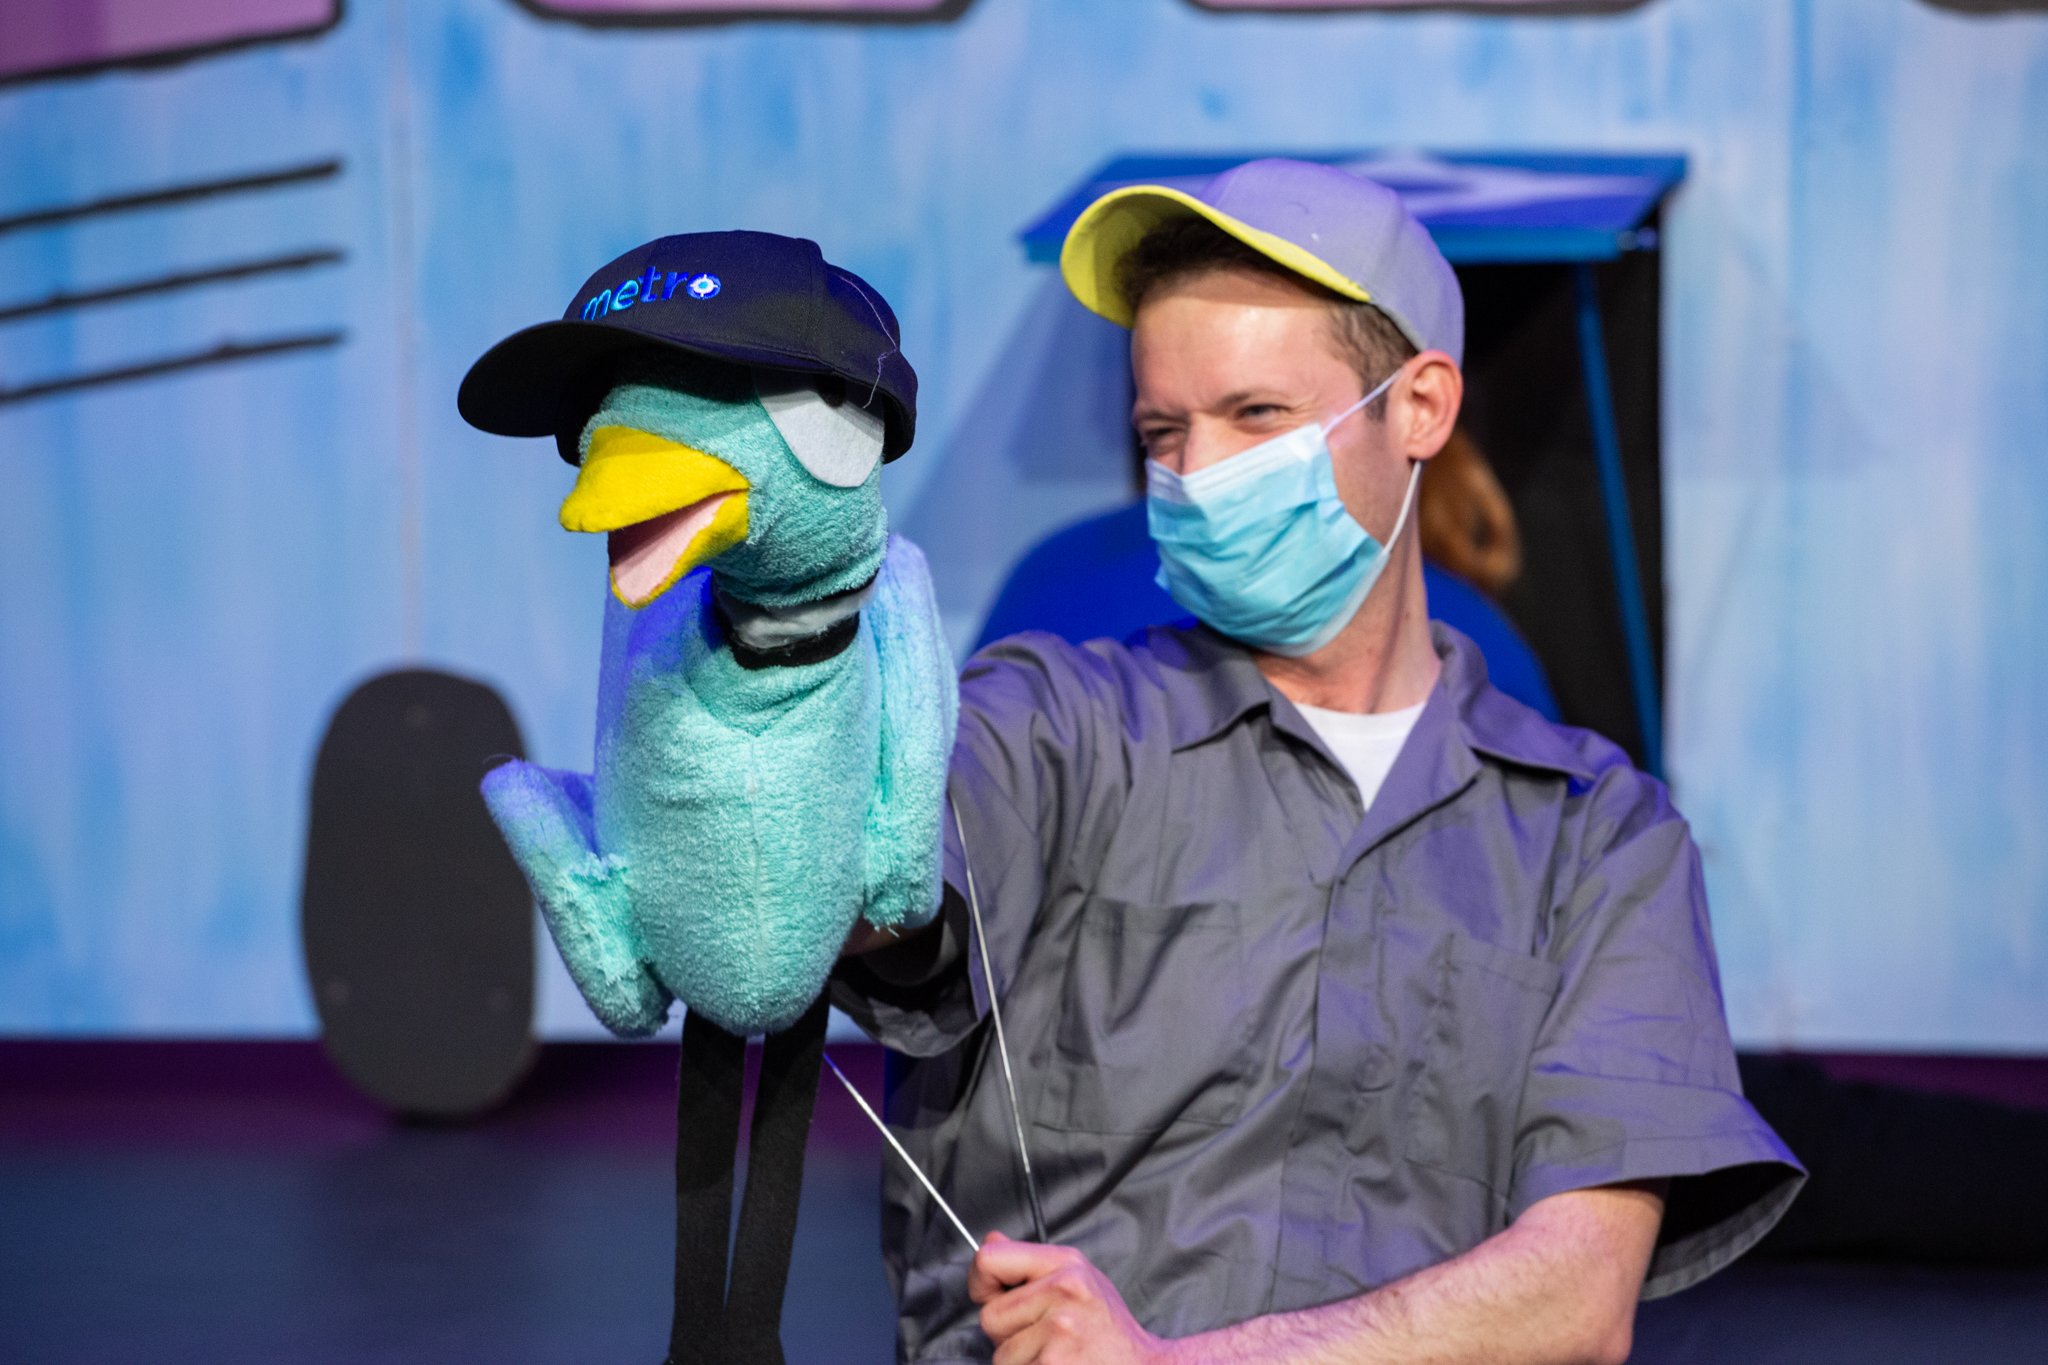 202301 - Maddys Theater - Dont Let the Pigeon Drive the Bus - Dress with Masks  - KatieDayPhoto - Low Res-13 (1).jpg